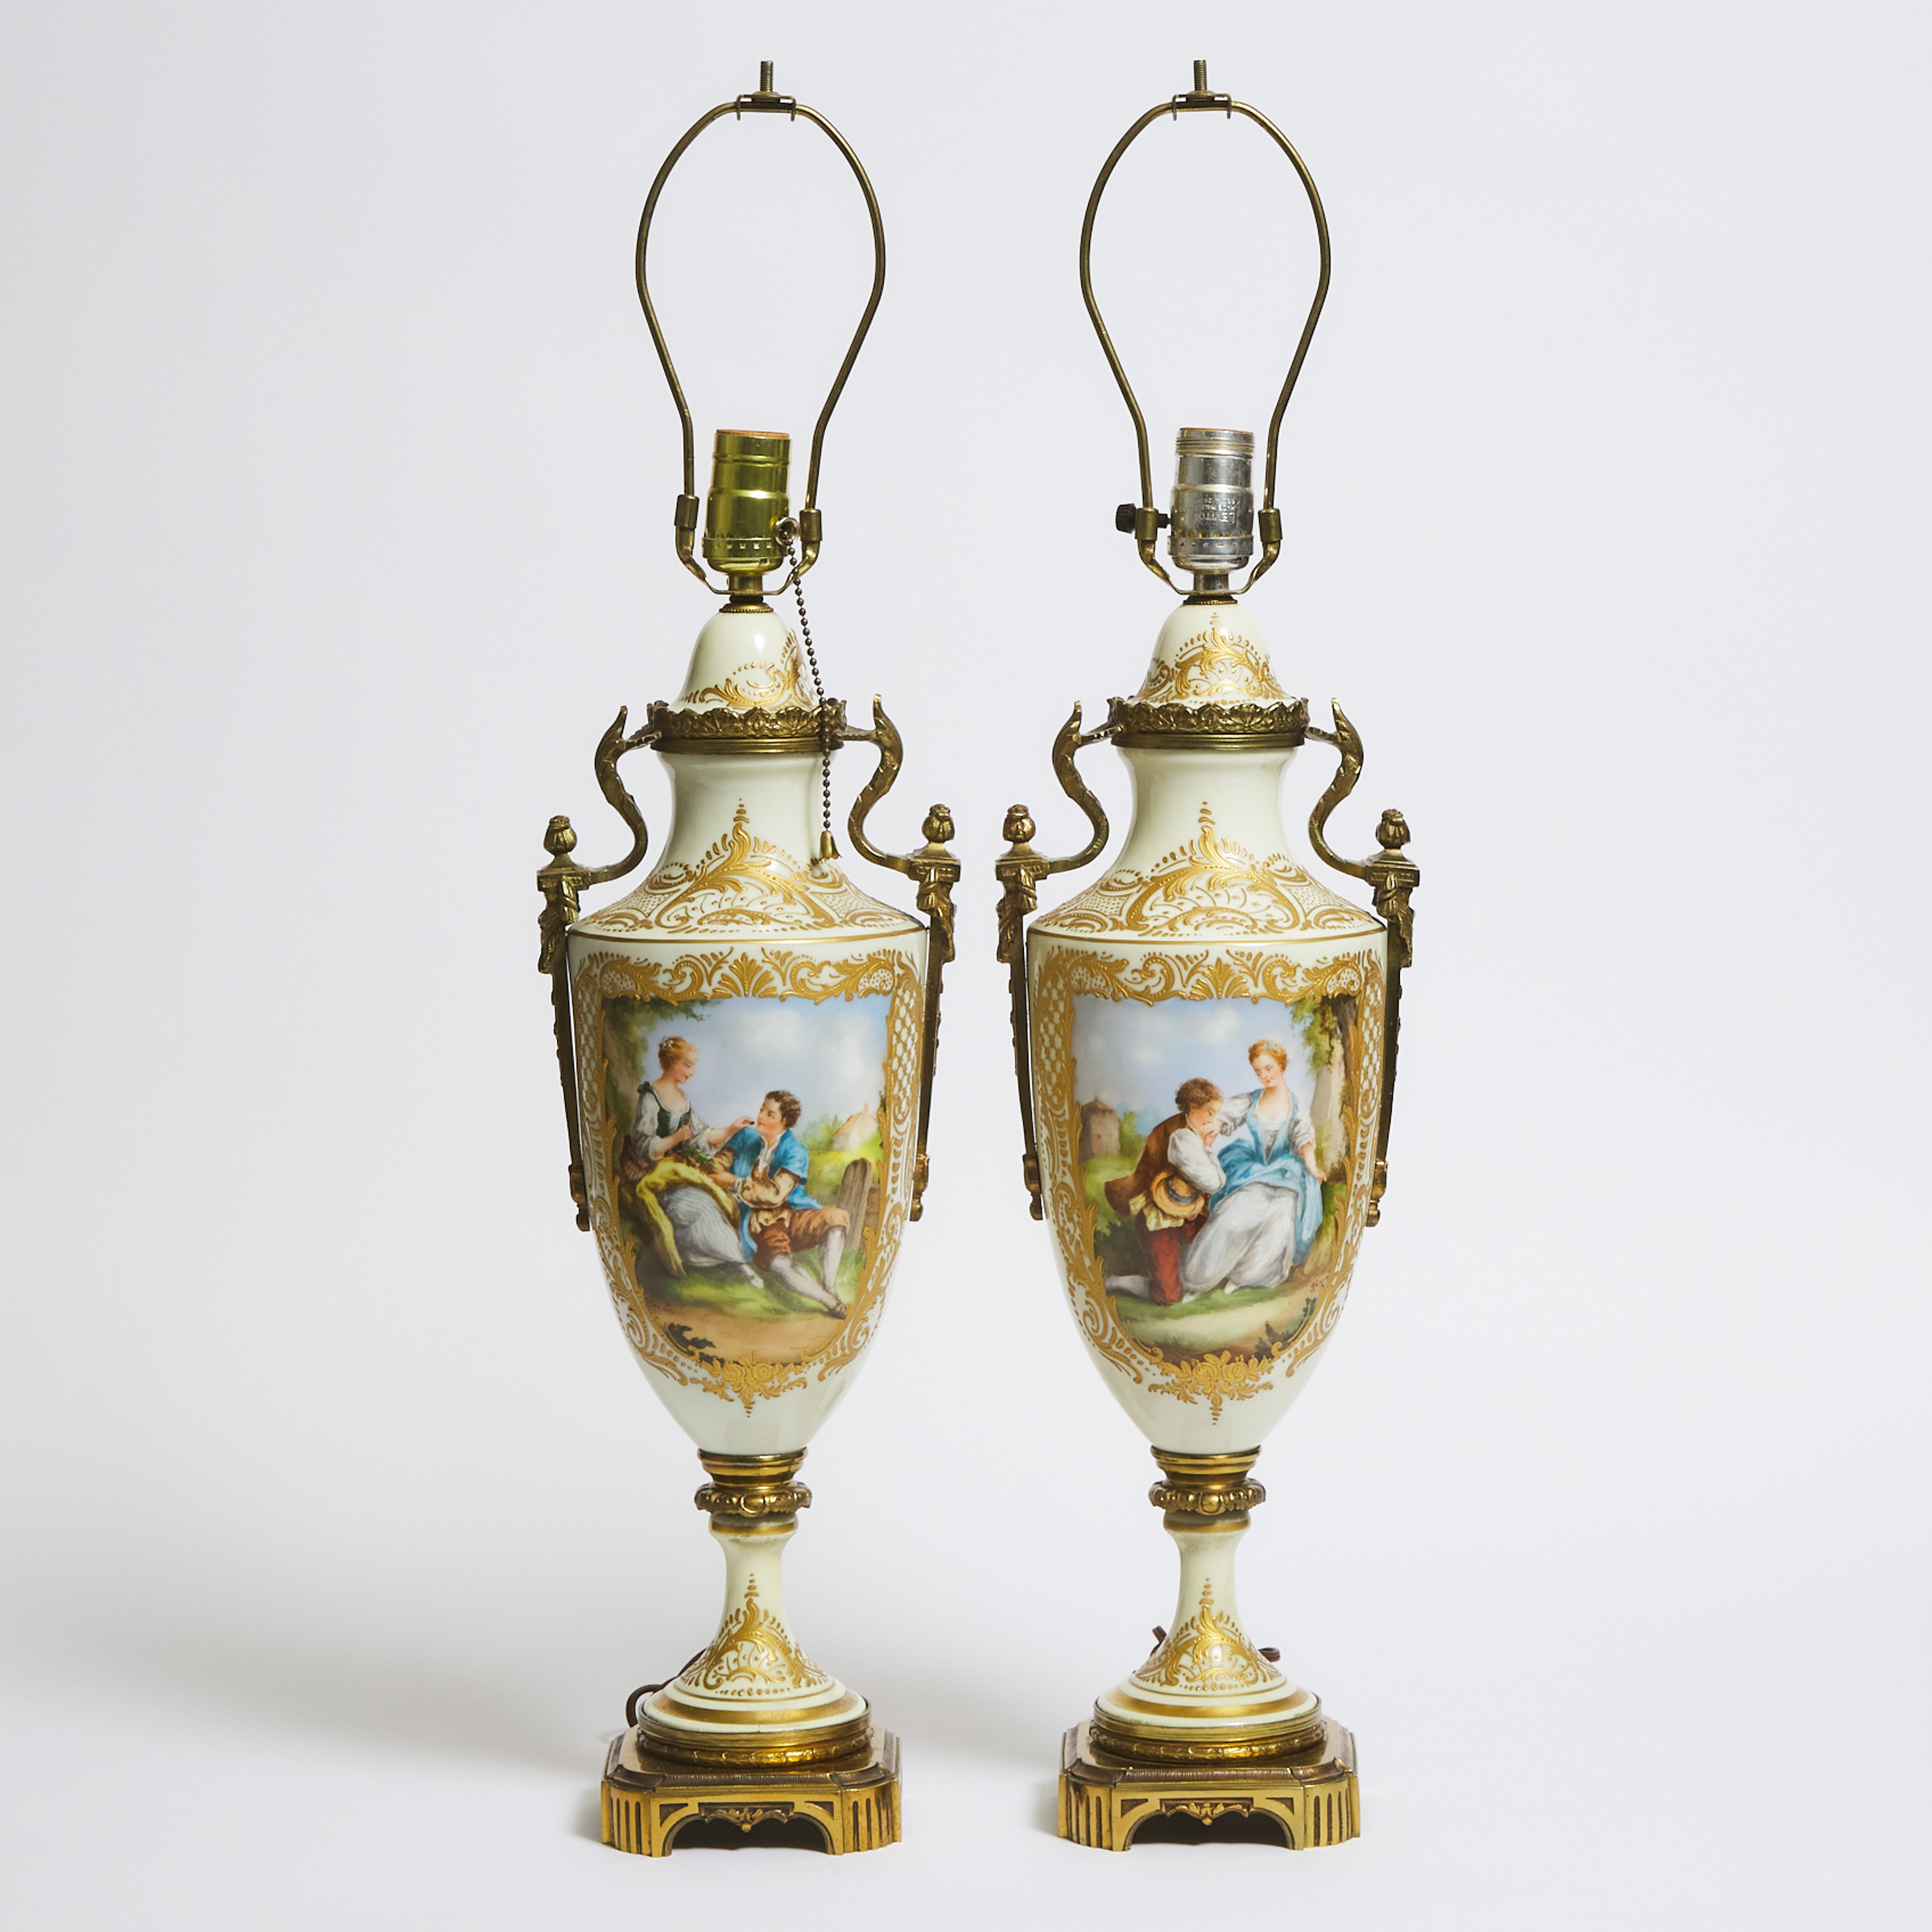 Pair of Gilt-Metal Mounted 'Sèvres' Table Lamps, early 20th century